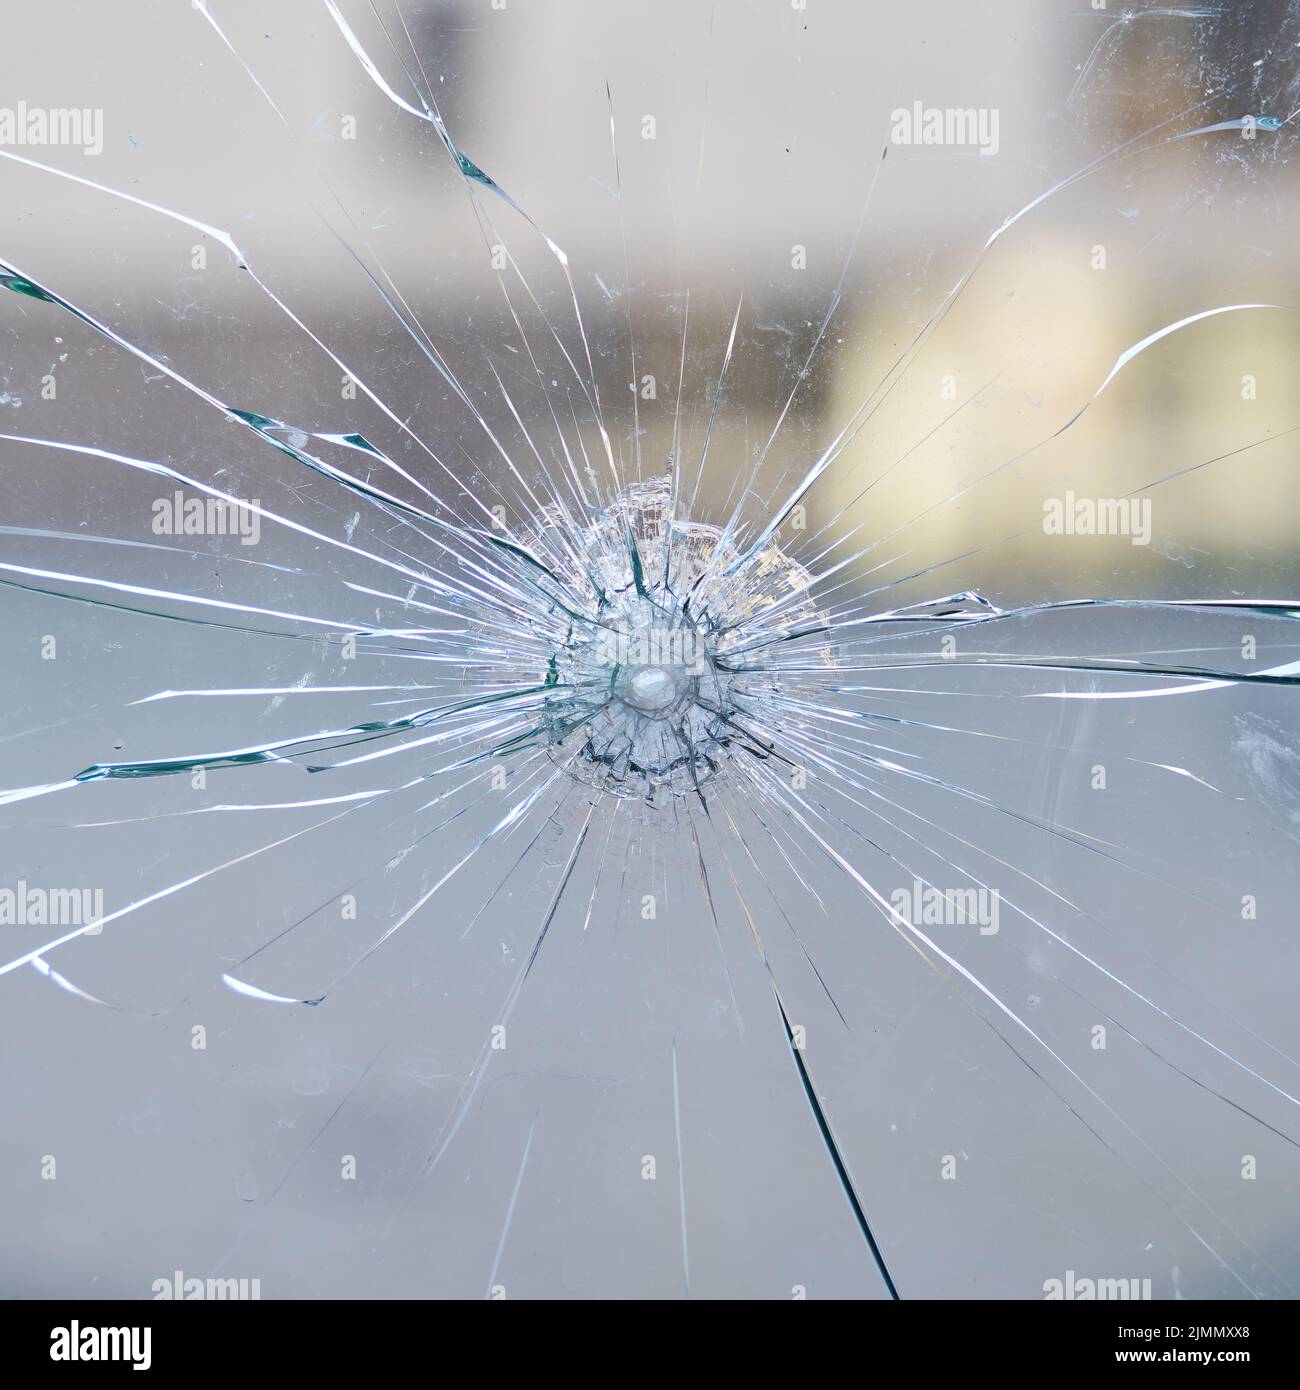 Destroyed window pane from safety glass at a store Stock Photo